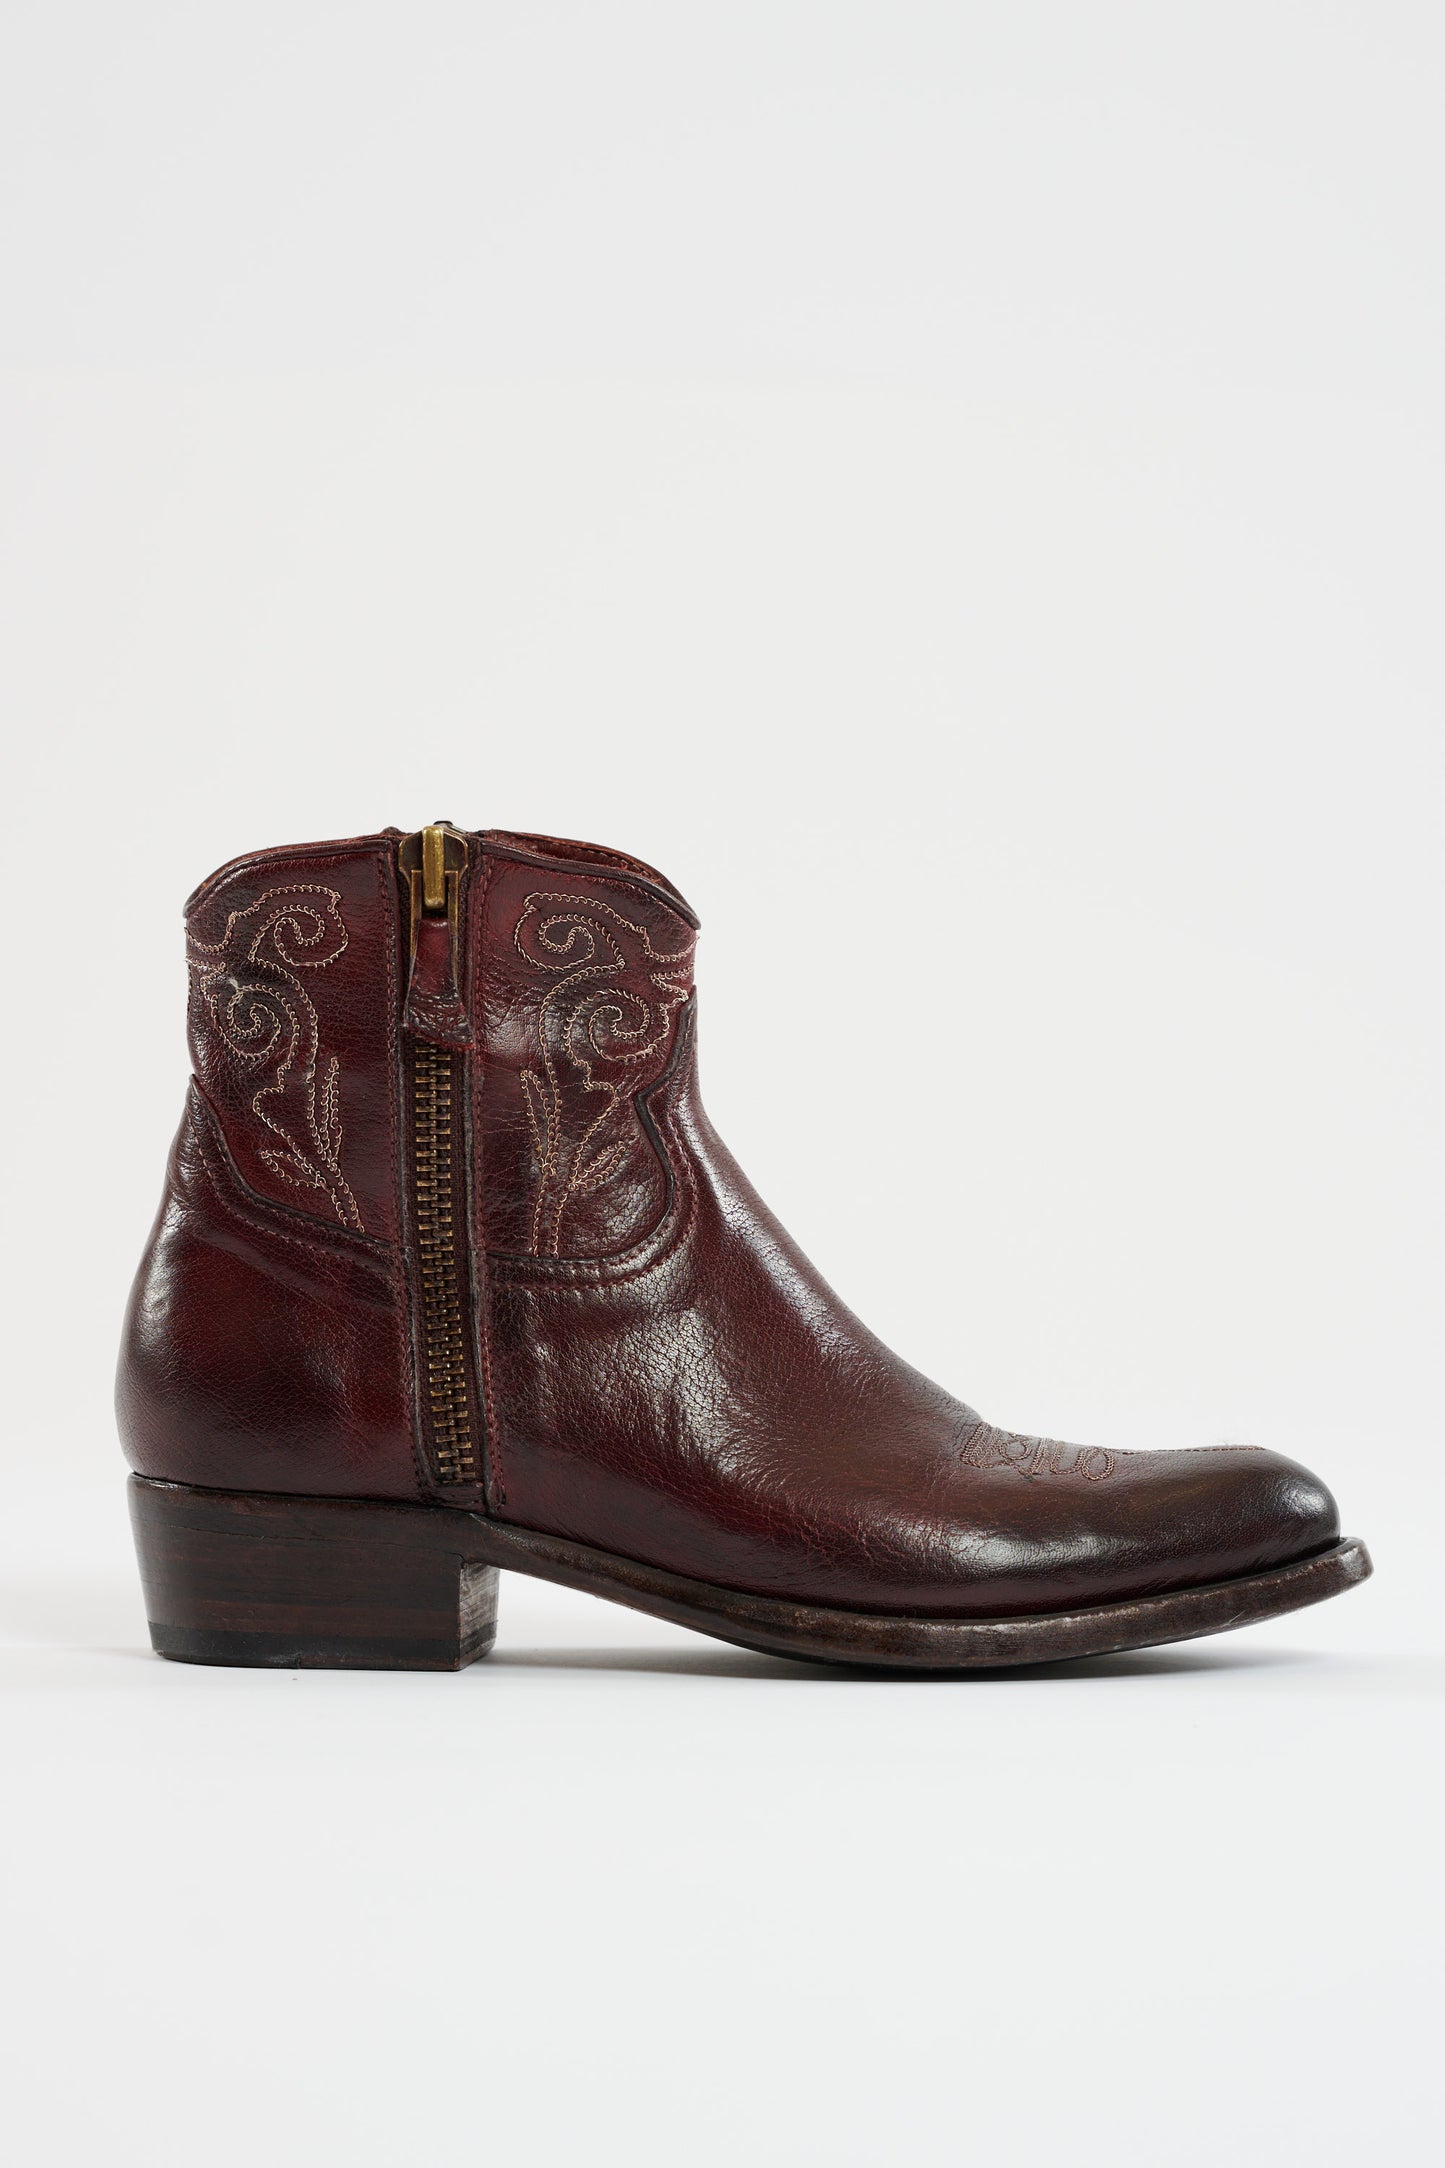 LEATHER BOOTS\t\t\t BURGUNDY